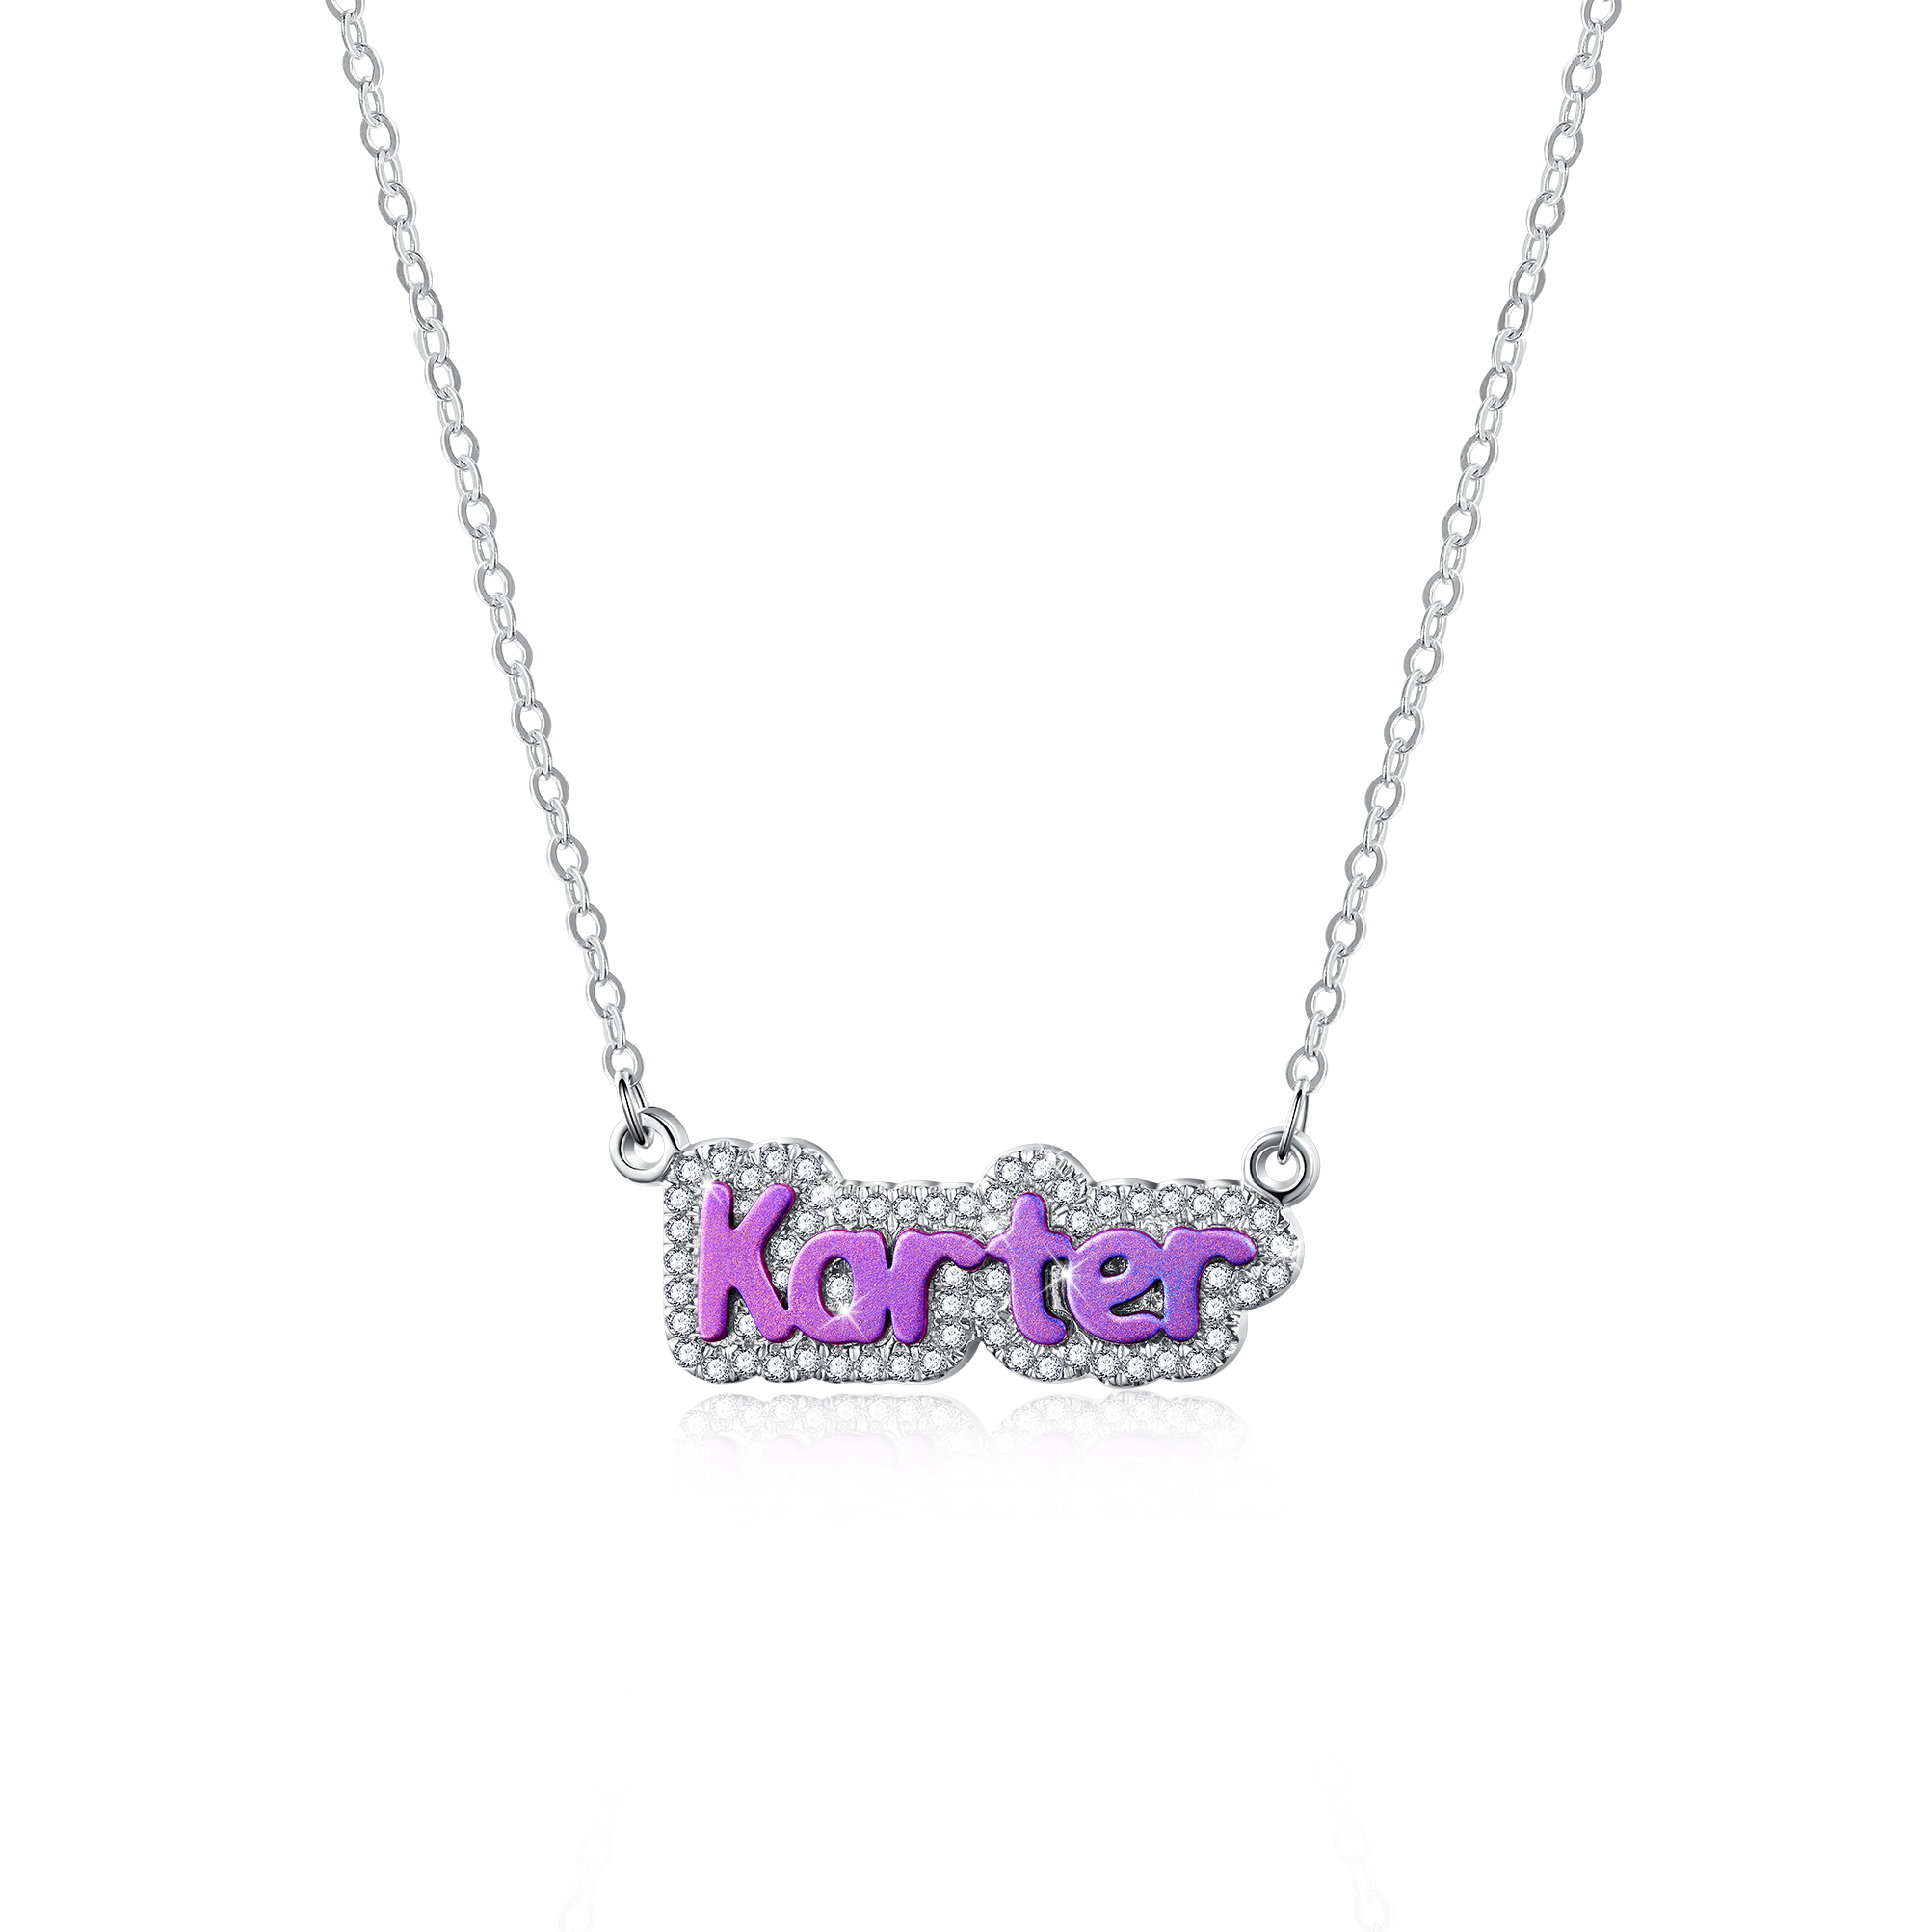 Titanium Steel Colorful Personalized Name Necklace